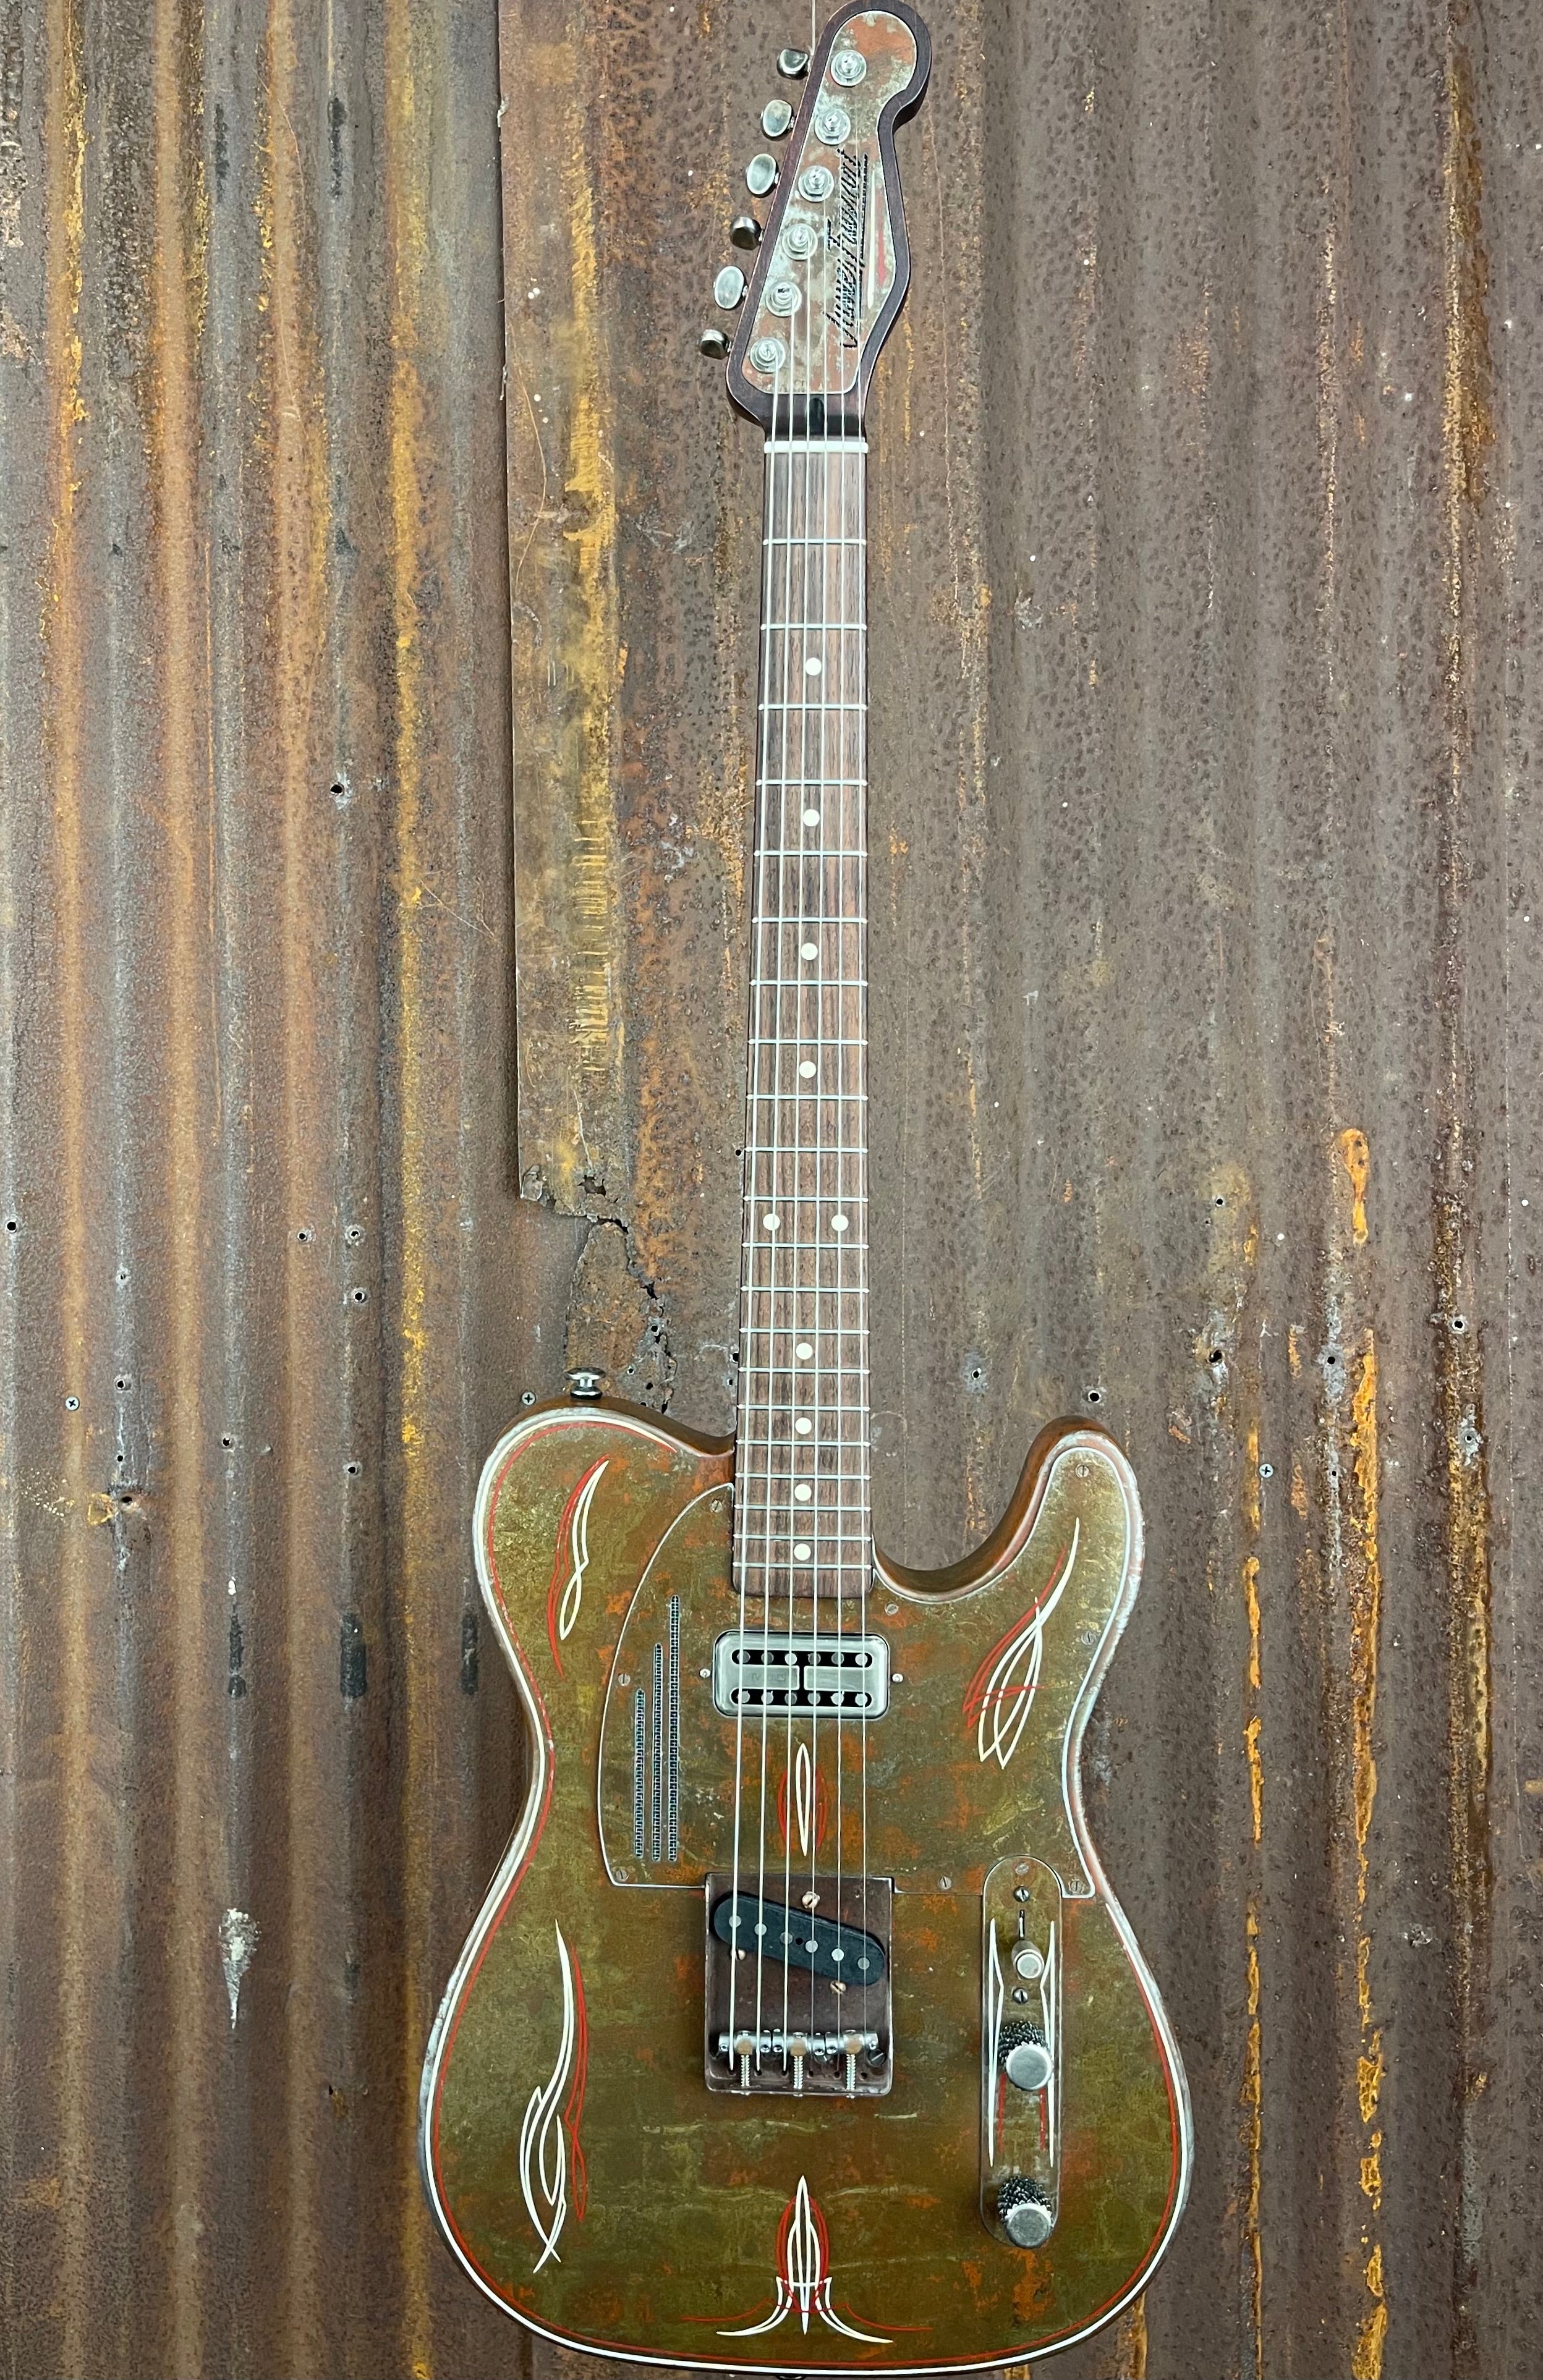 21091 Rust O Matic Pinstriped SteelCaster